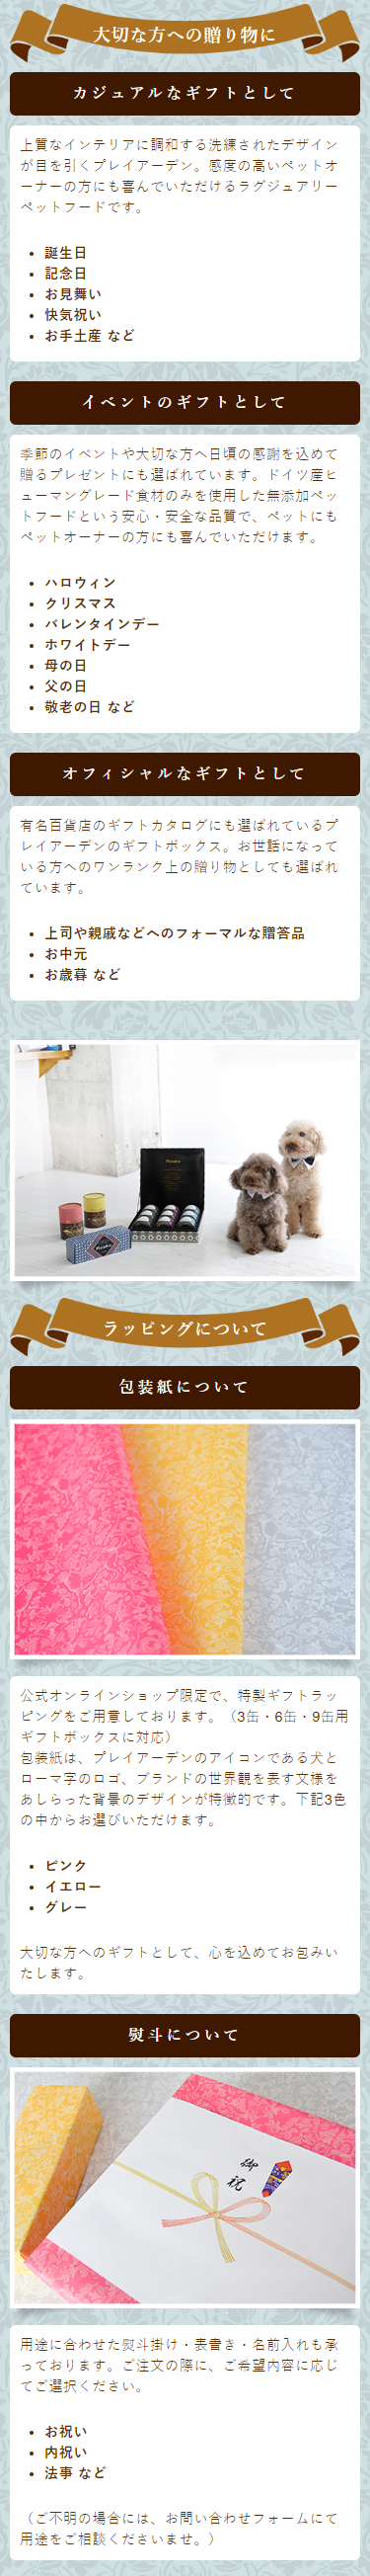 100％Natur ギフトボックス6缶 for Dog ALL ドイツ鱒